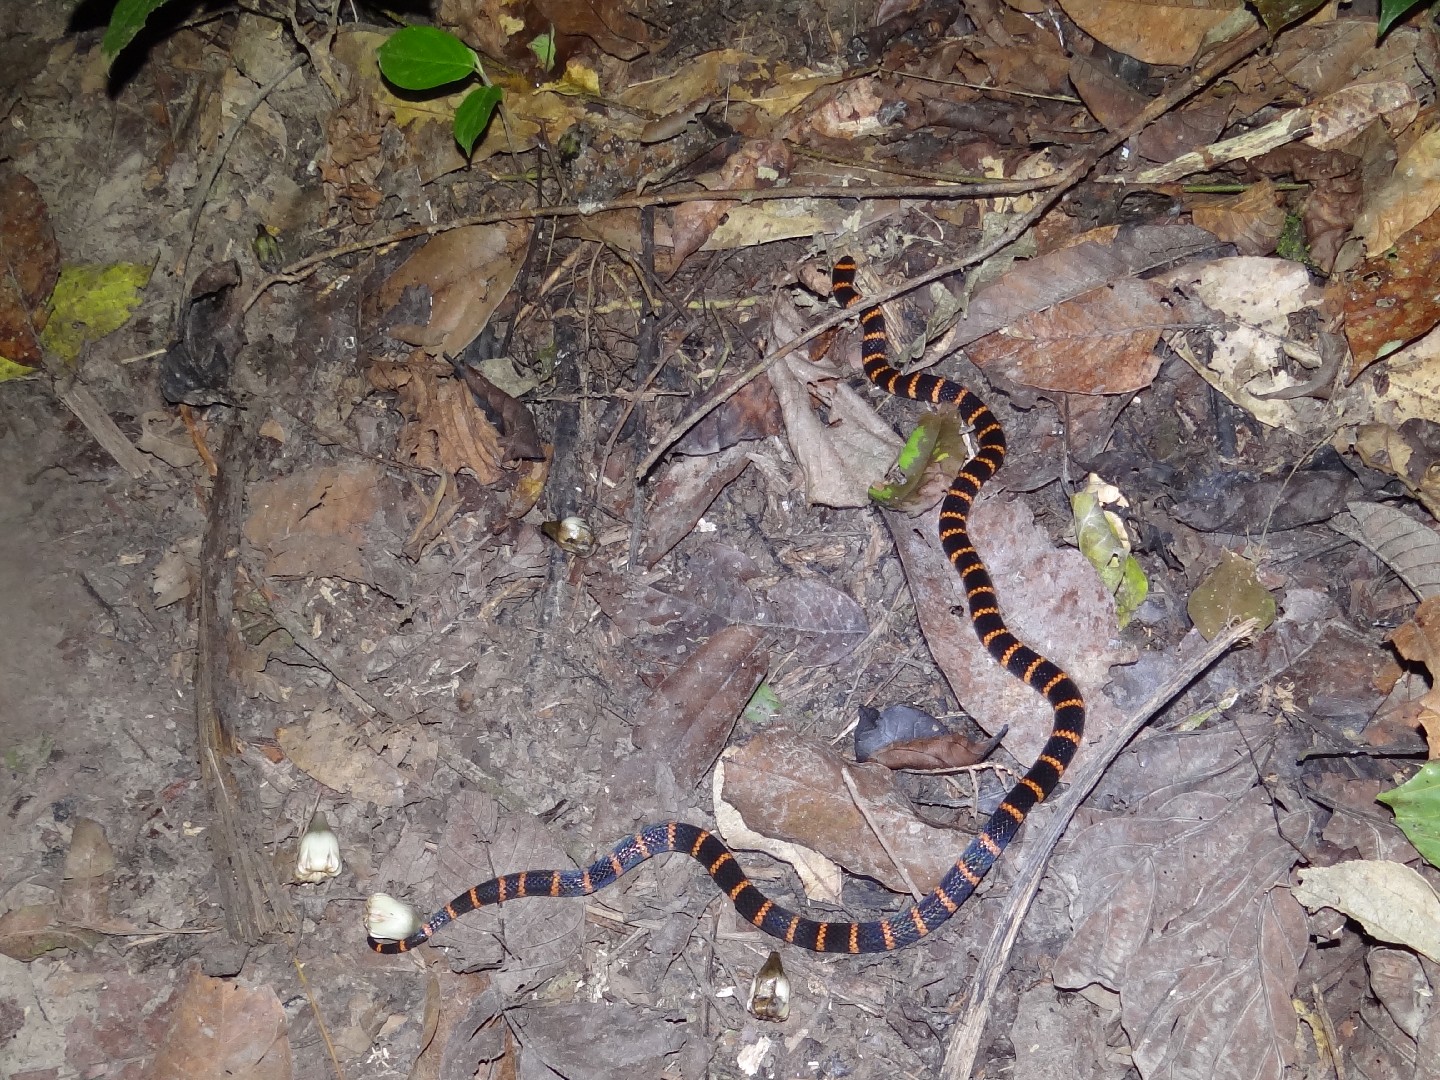 Coral snakes (Micrurus)